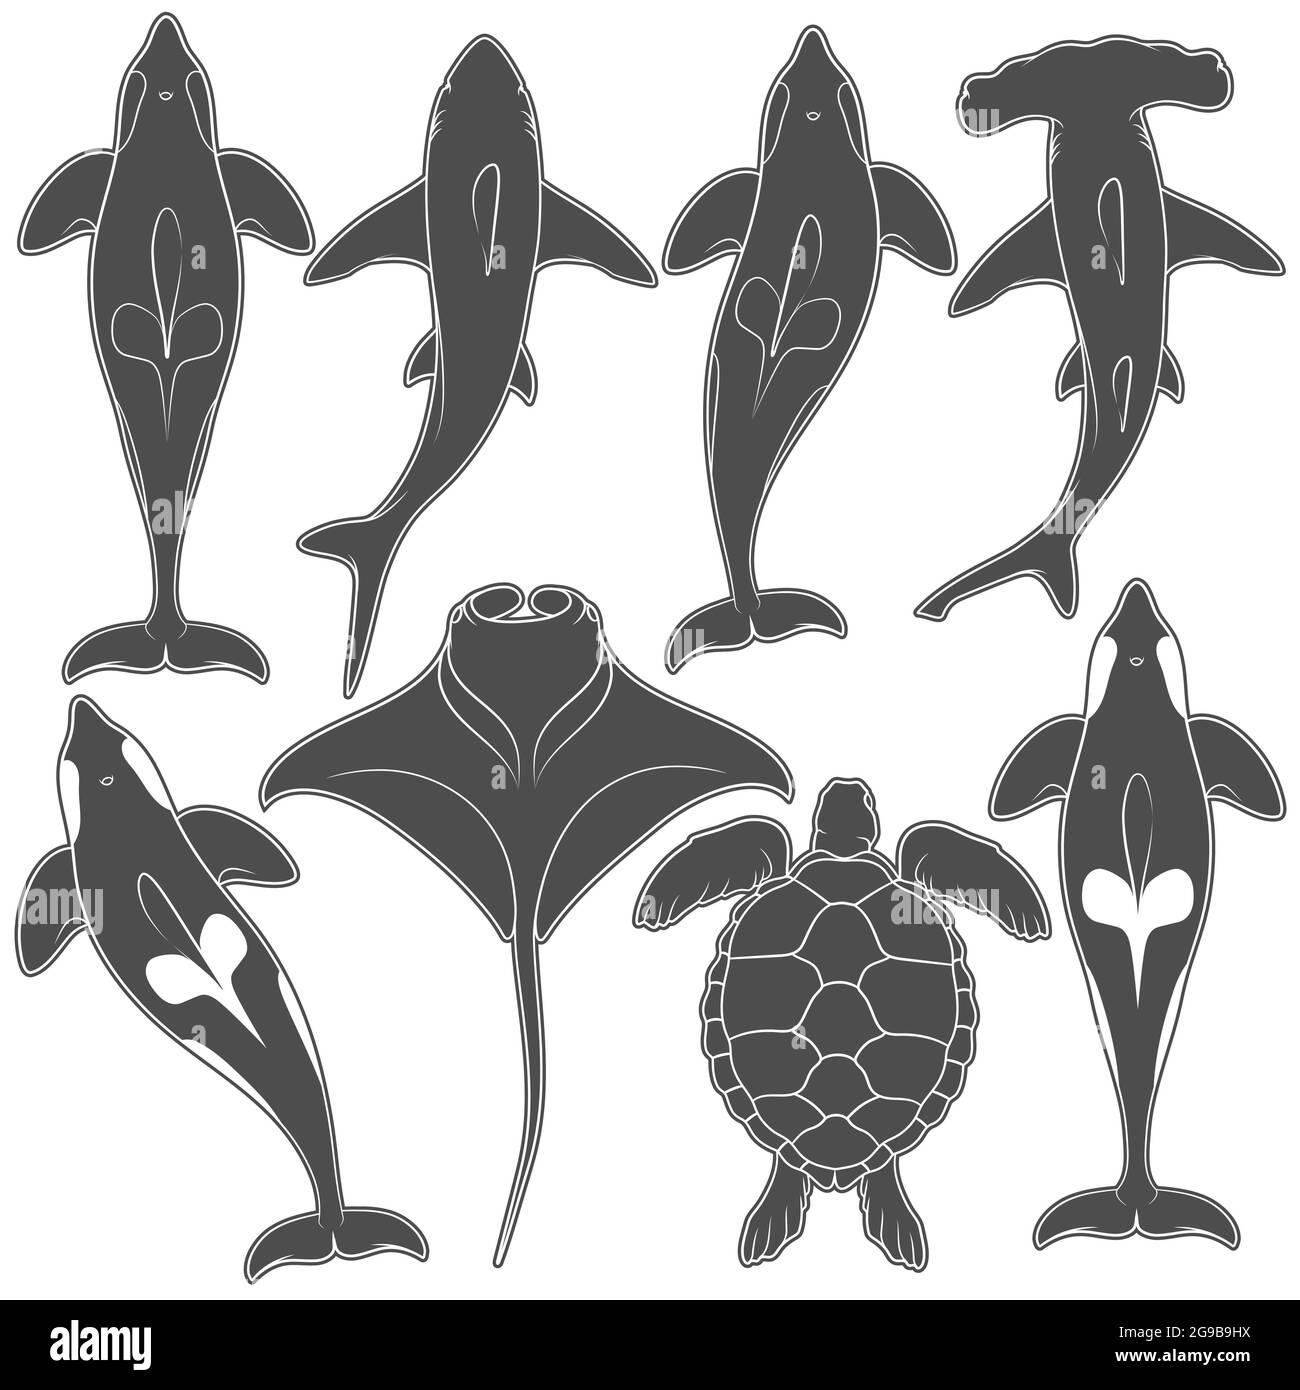 Set of images with marine animals. Vector black and white isolated objects on white background. Stock Vector